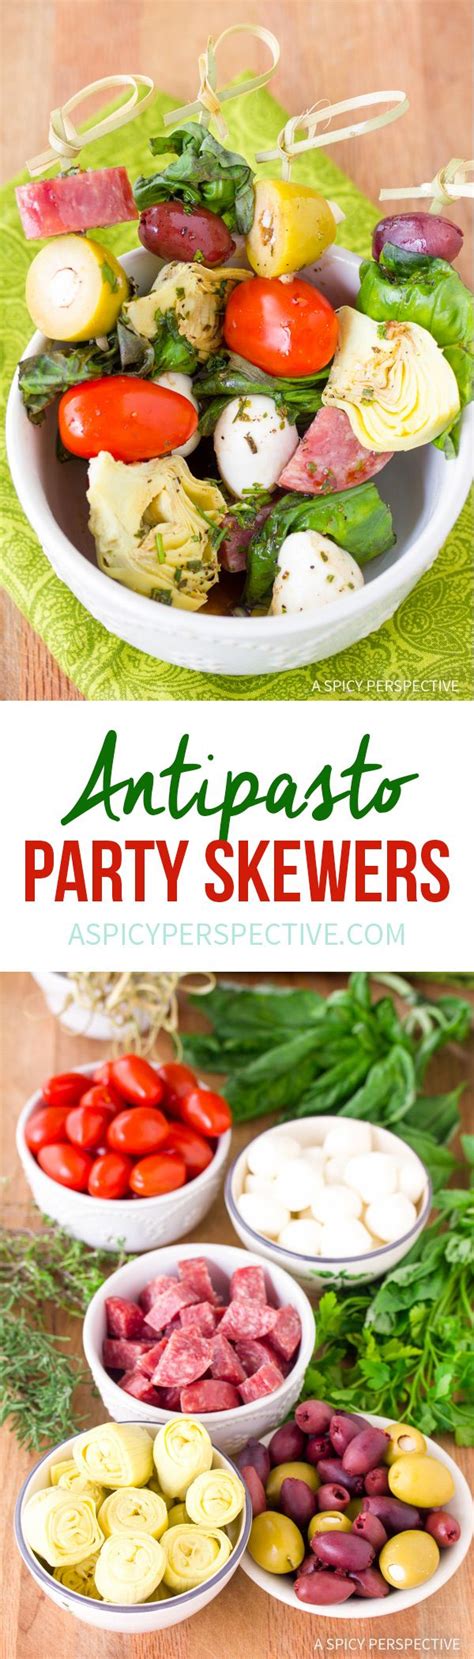 A fun party finger food!submitted by: Make-Ahead Antipasto Skewers with Herb Vinaigrette Recipe via @spicyperspectiv | Antipasto ...